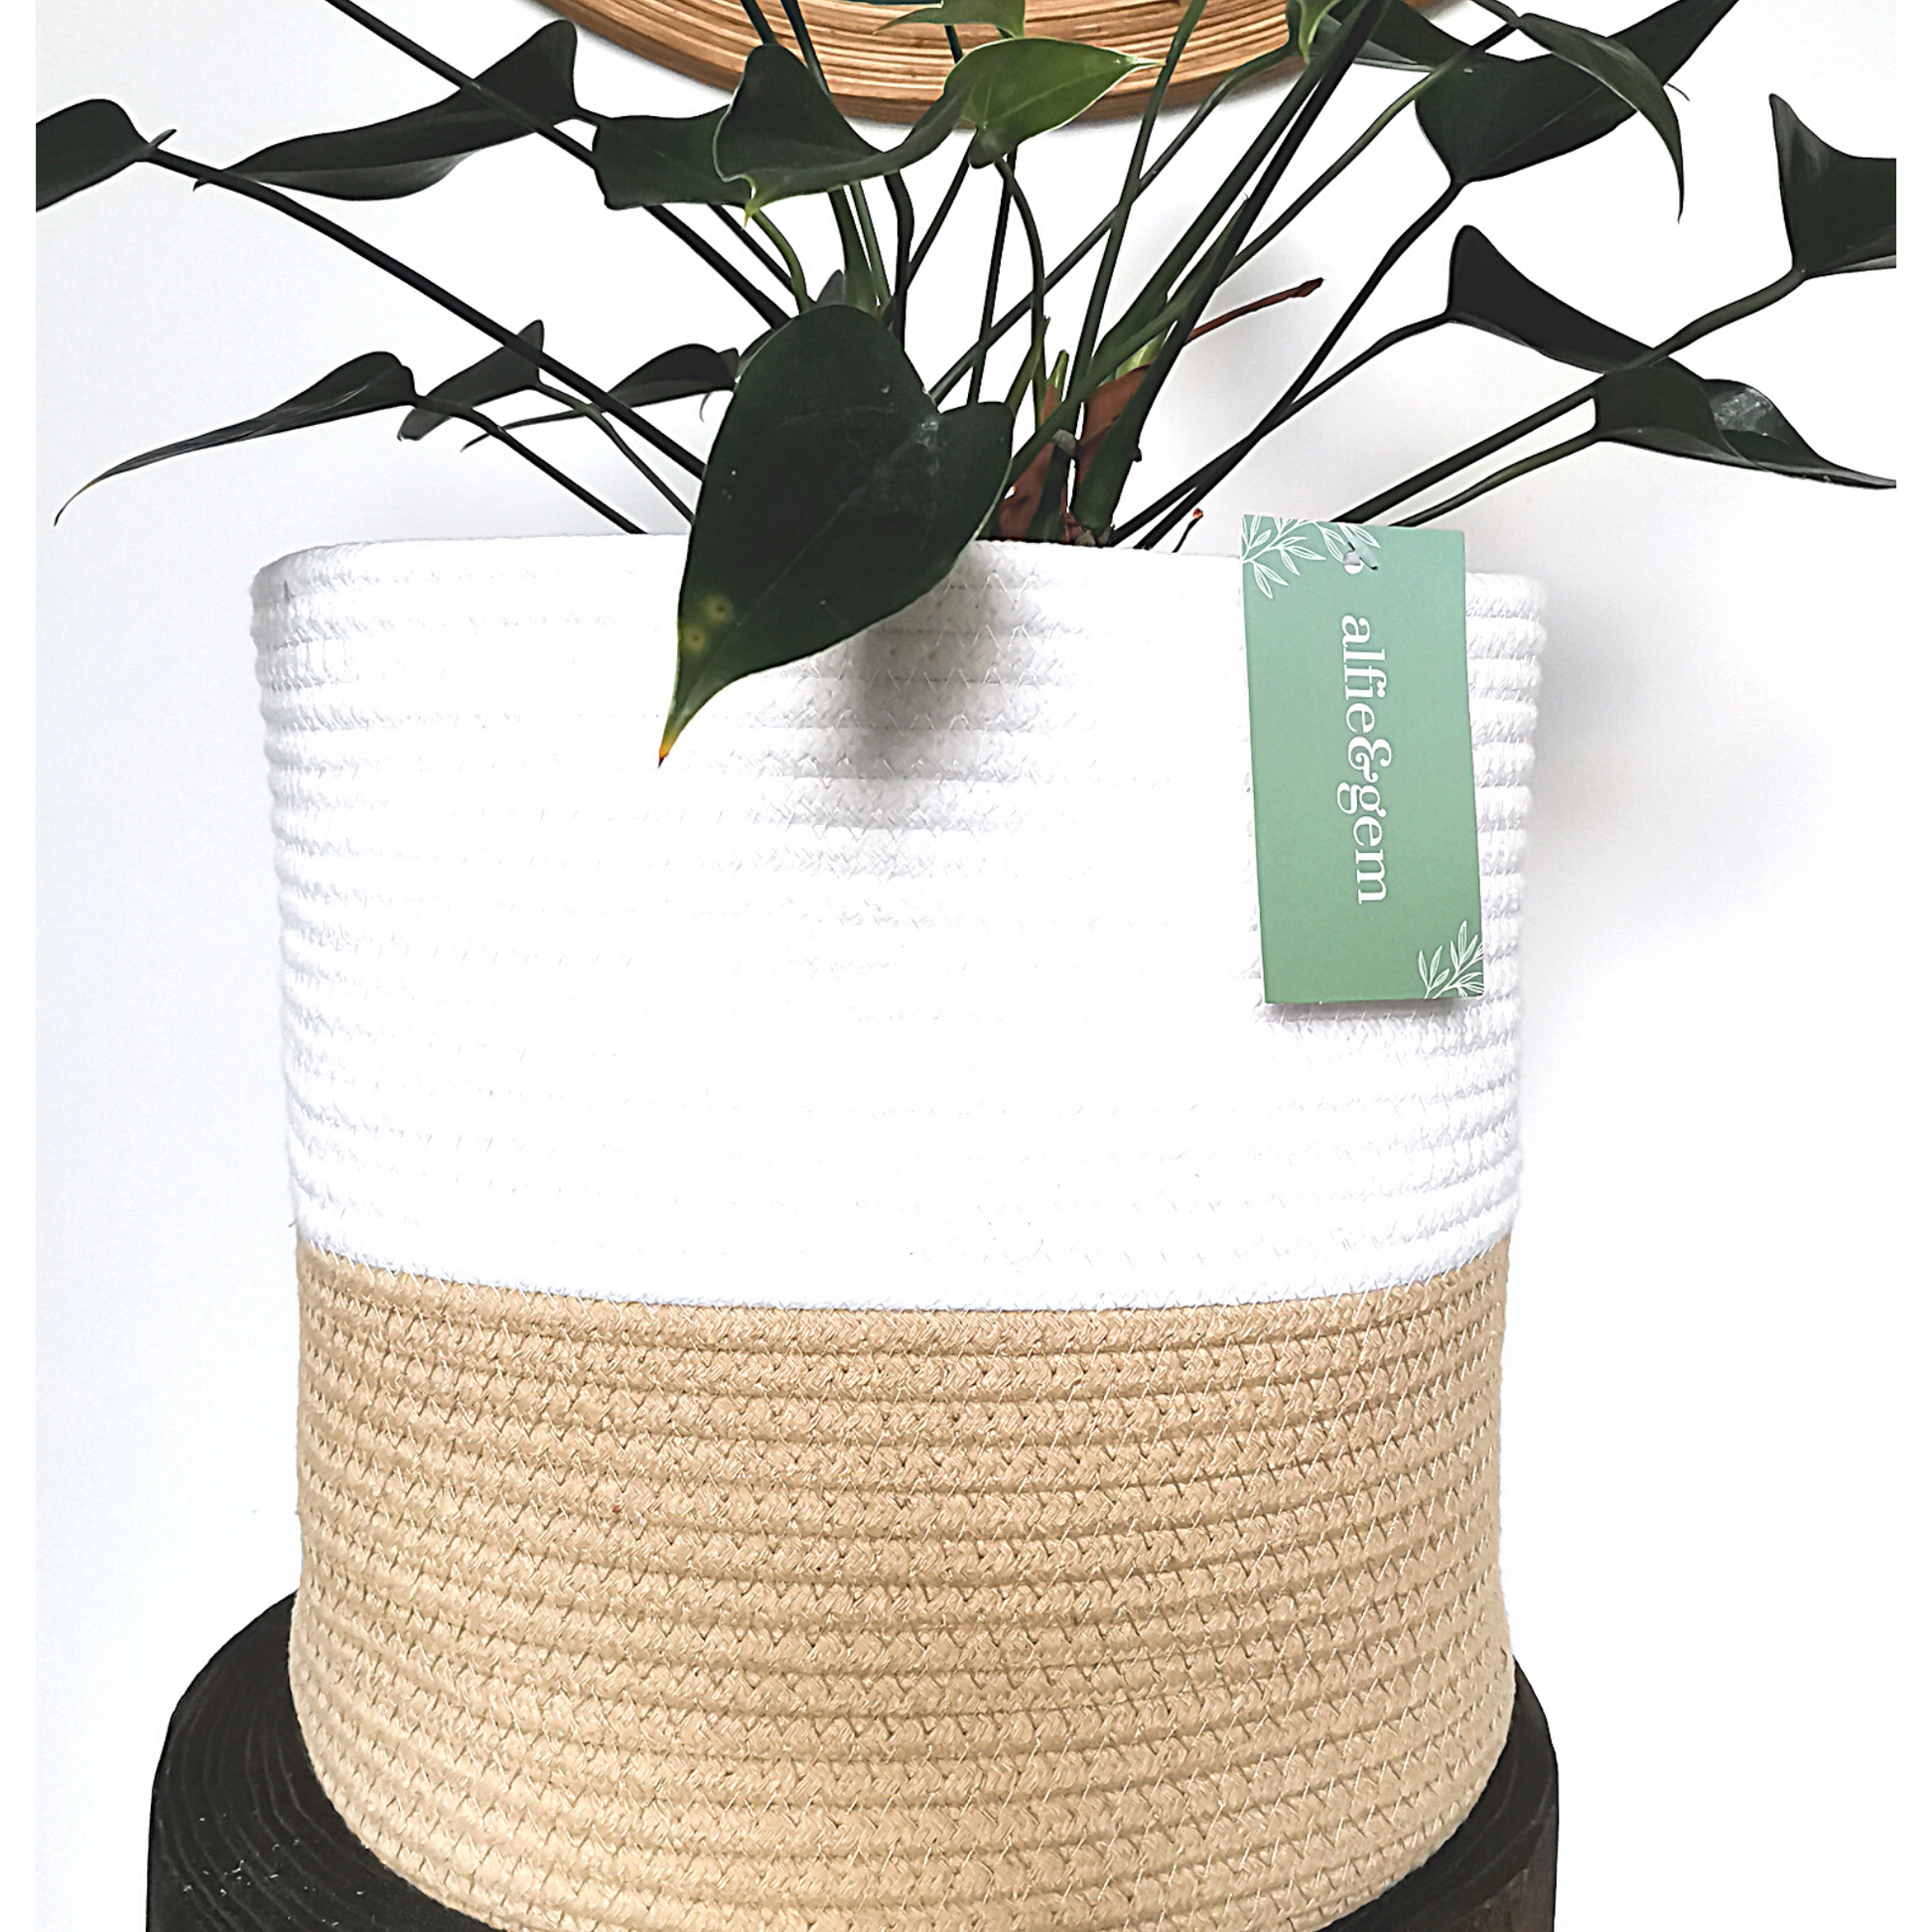 Light-colored handwoven cotton rope baskets for plant pots of different sizes.